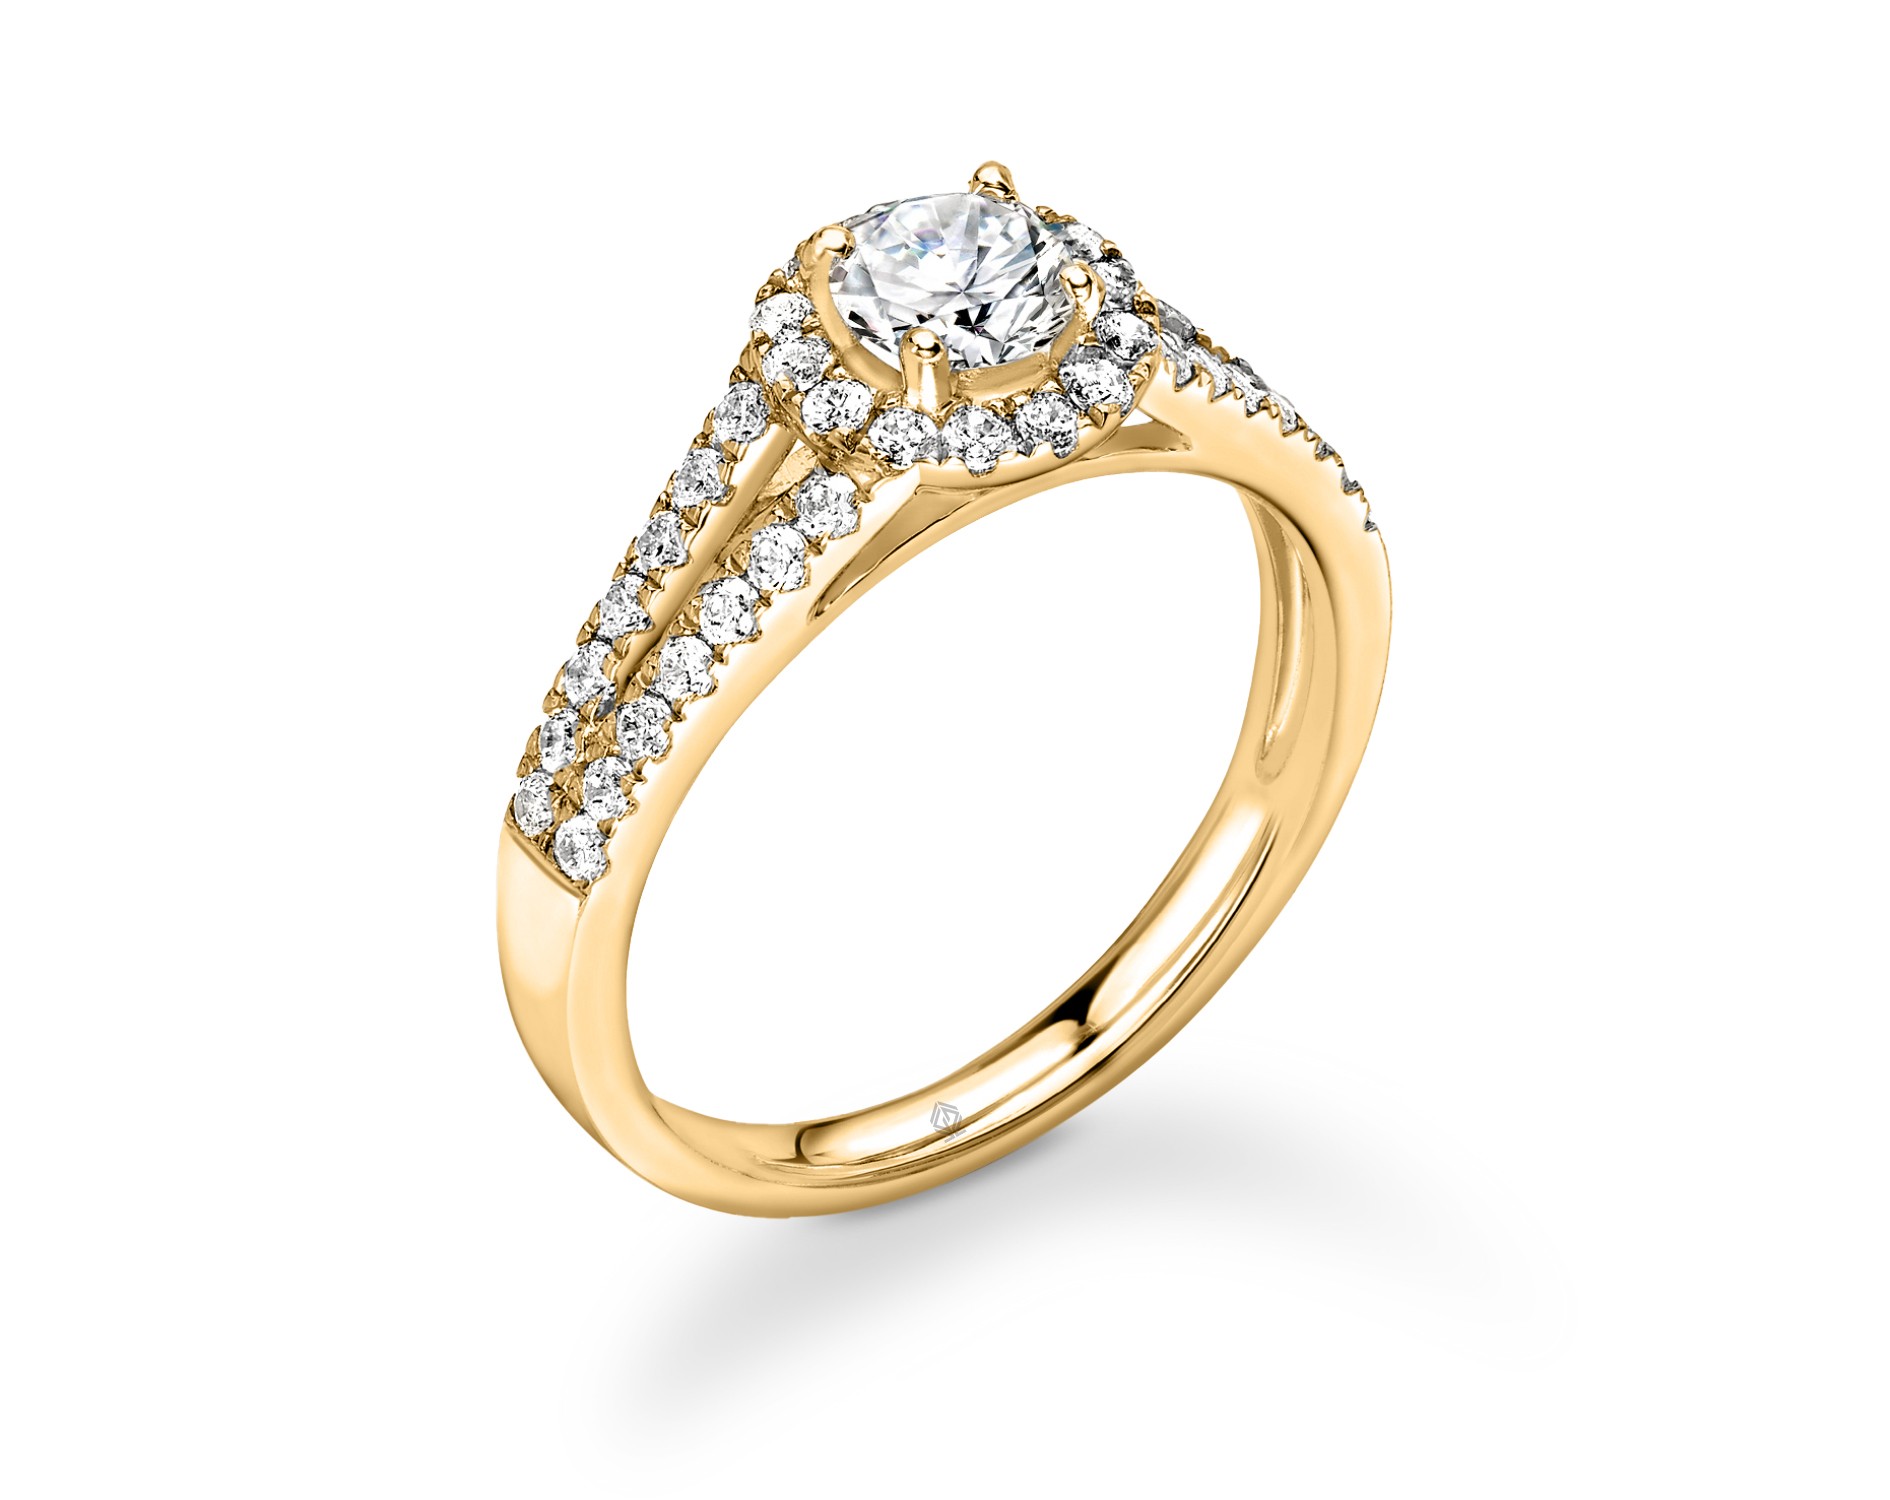 18K YELLOW GOLD ROUND CUT HALO DIAMOND ENGAGEMENT RING WITH SPLIT SHANK PAVE SET